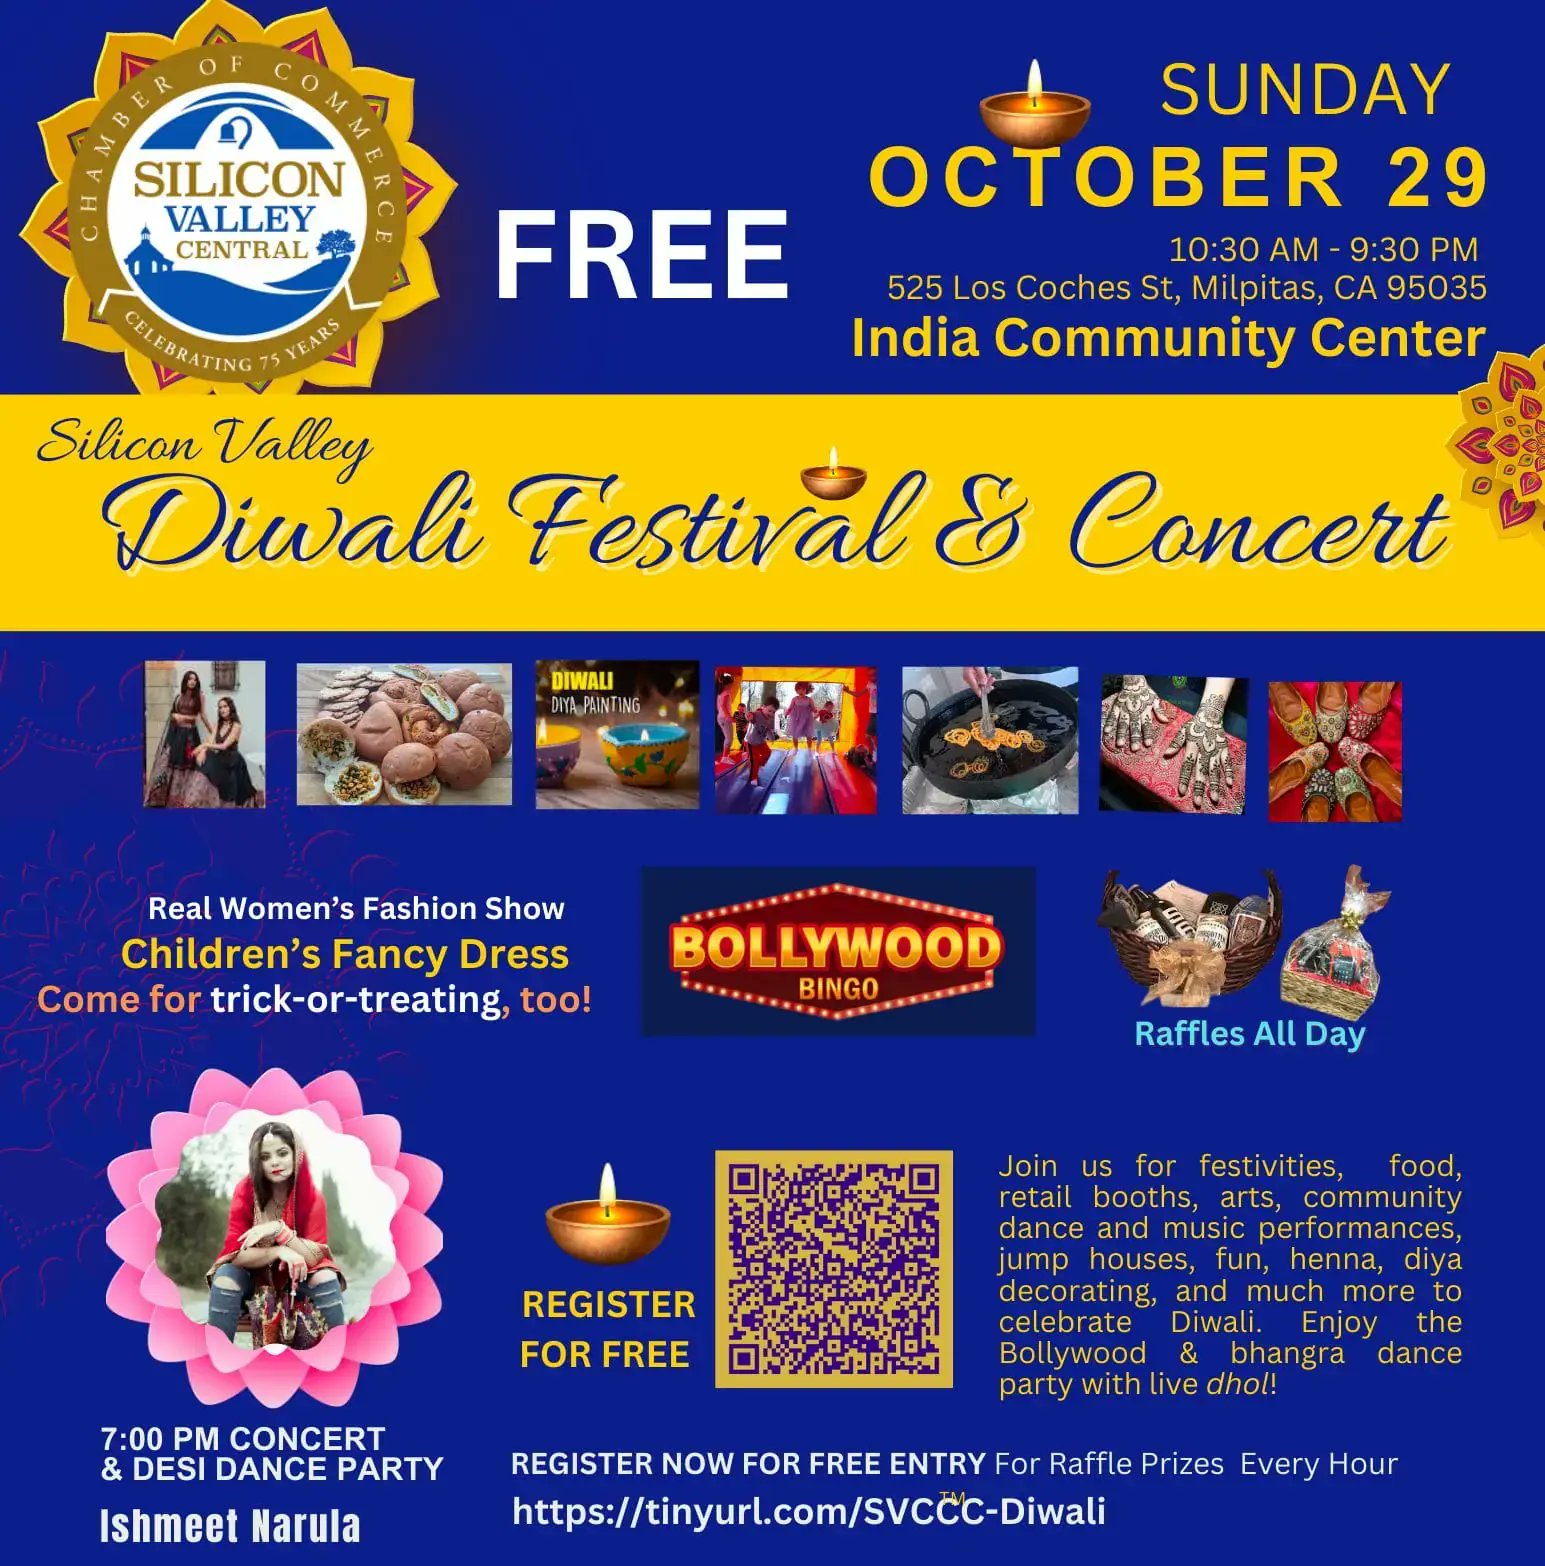 indicanews.com on X: Silicon Valley Diwali Festival & Bollywood  Concert Dance Party (10/29) Register for FREE here =>   #diwali #siliconvalley #diwali2023 #DiwaliFestival  Invite you and your family to celebrate Silicon Valley